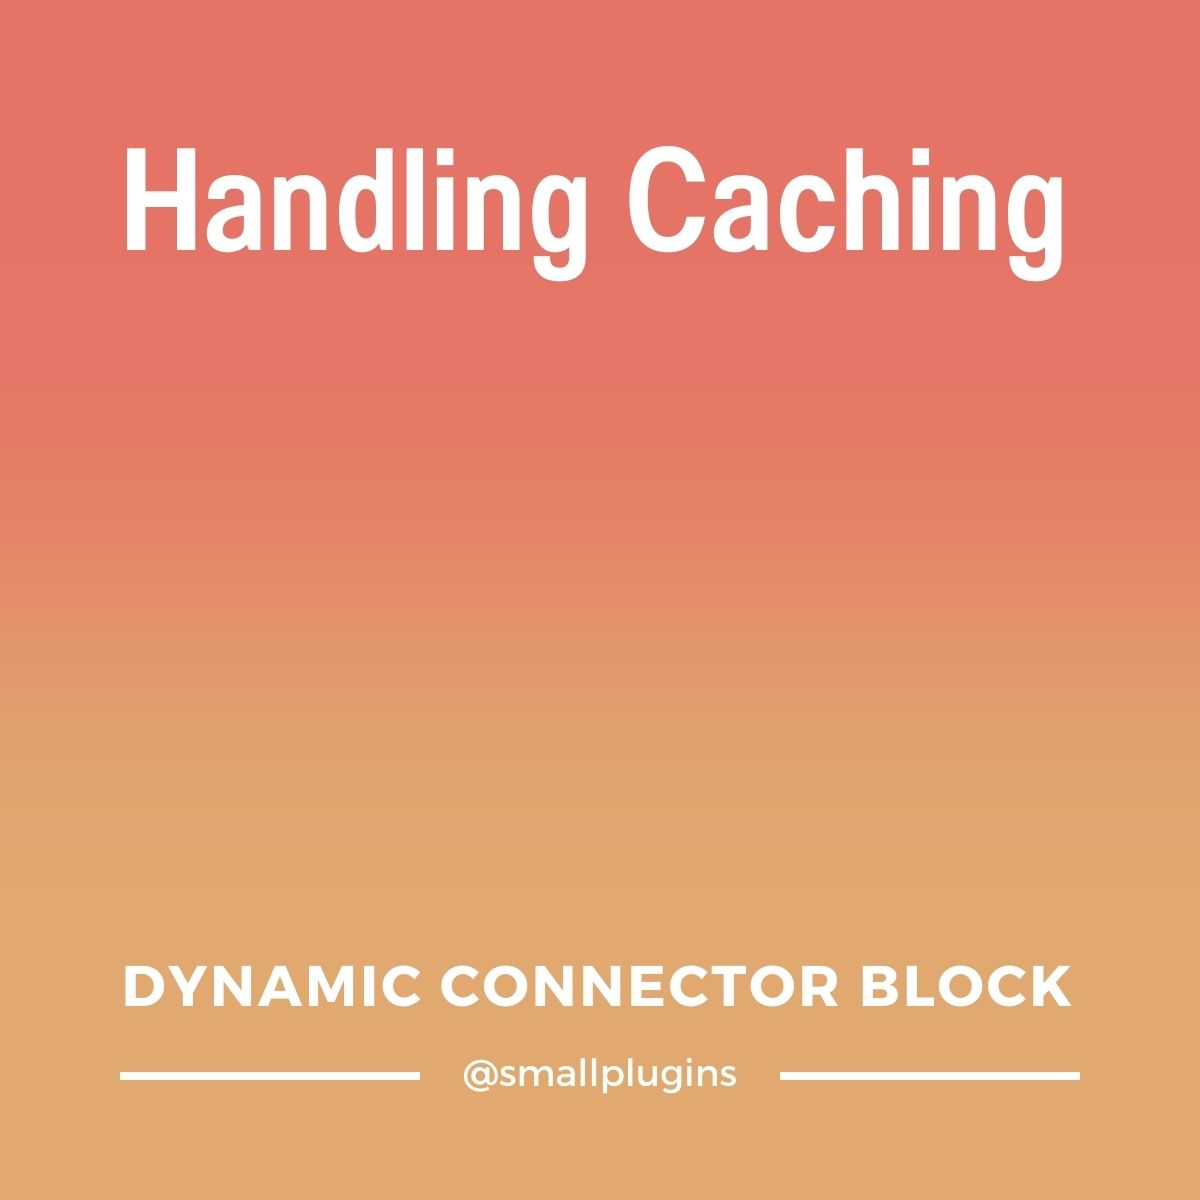 How does Dynamic Connector Block handle caching?